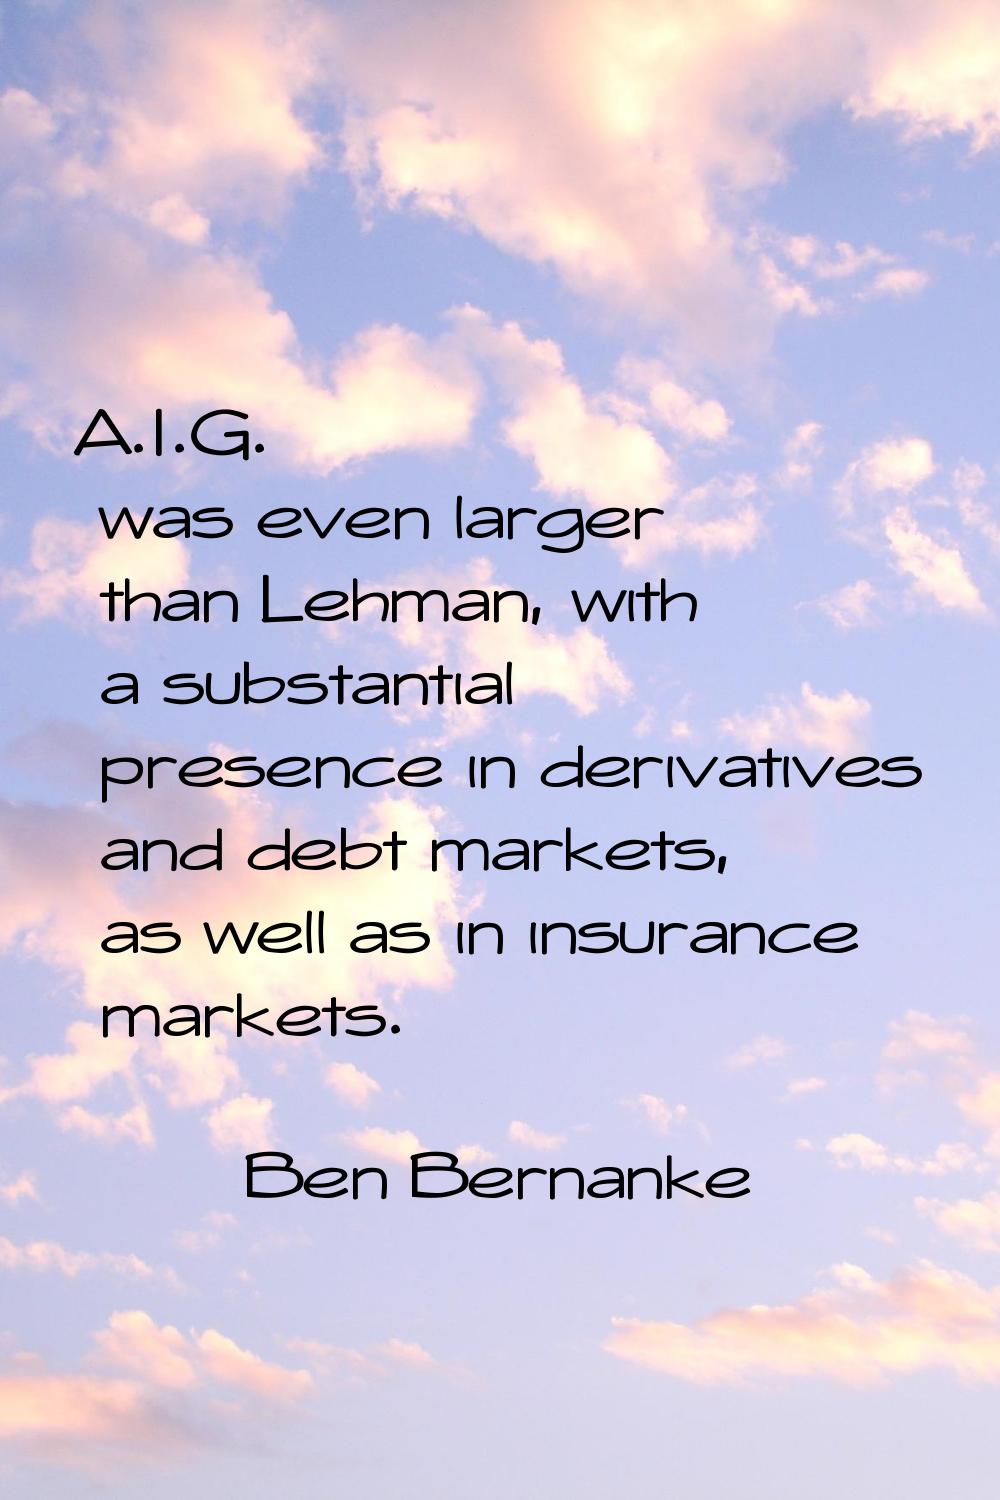 A.I.G. was even larger than Lehman, with a substantial presence in derivatives and debt markets, as